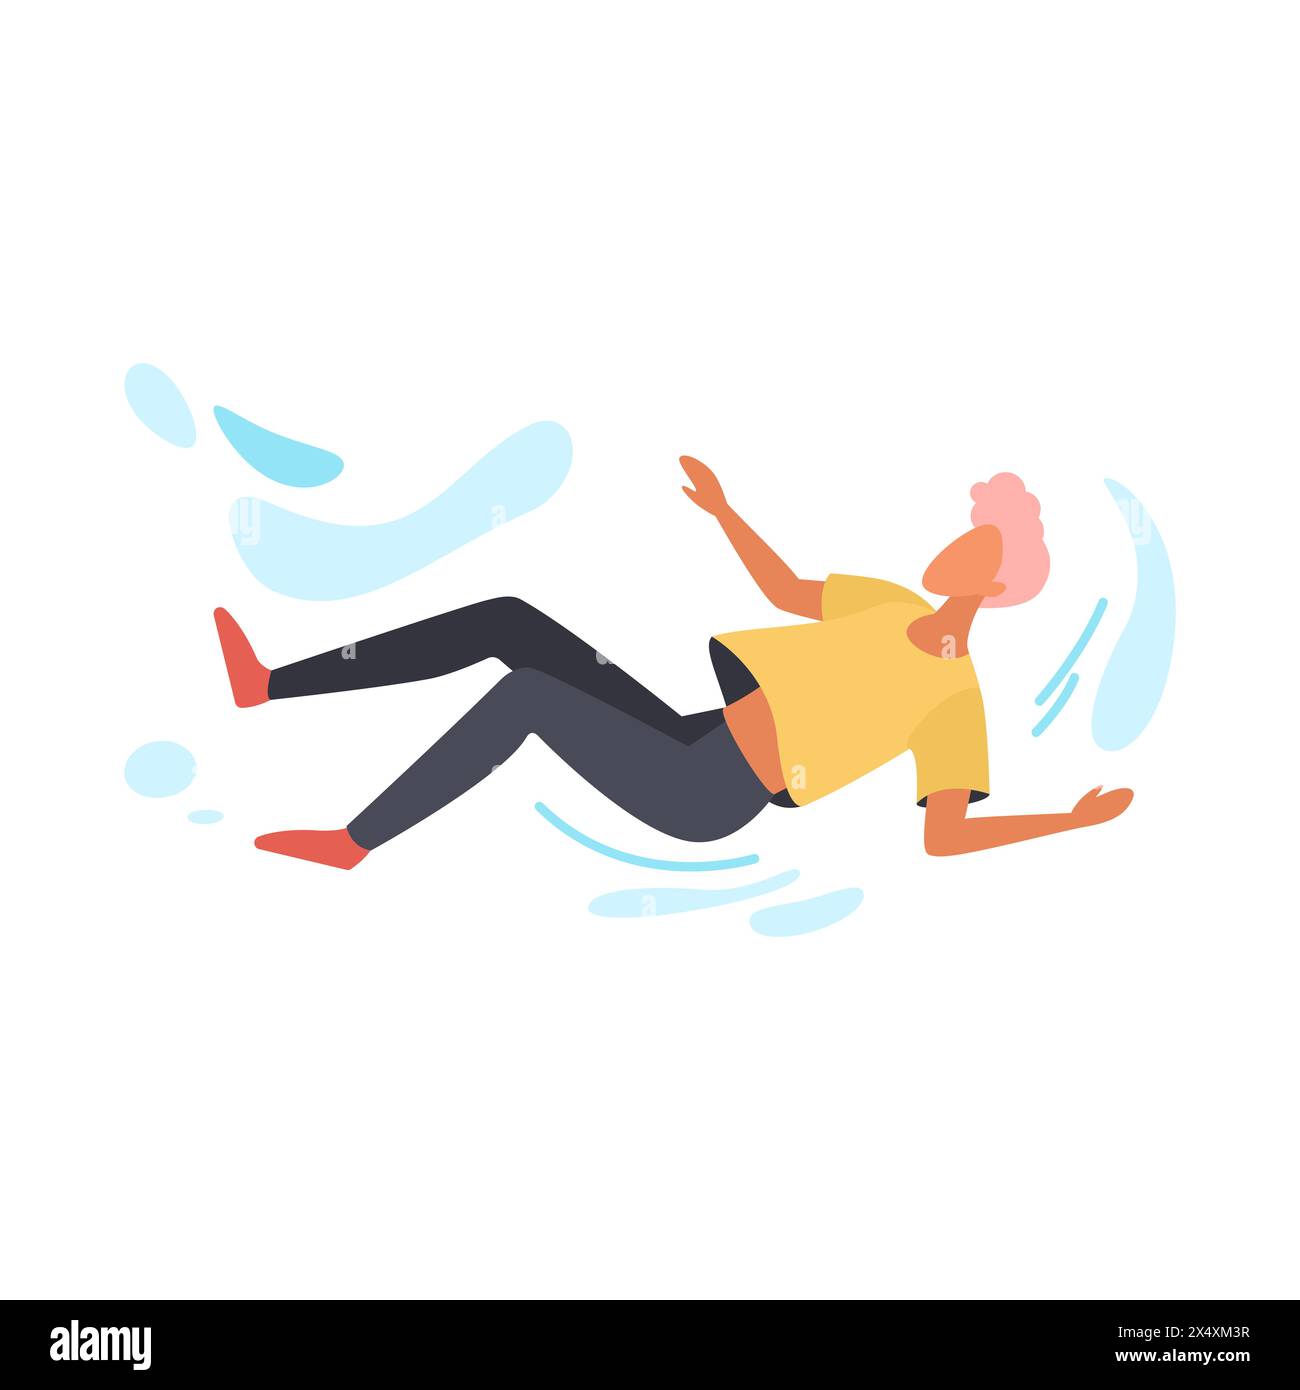 Man falling backwards in air currents, waving arms in fear vector illustration Stock Vector